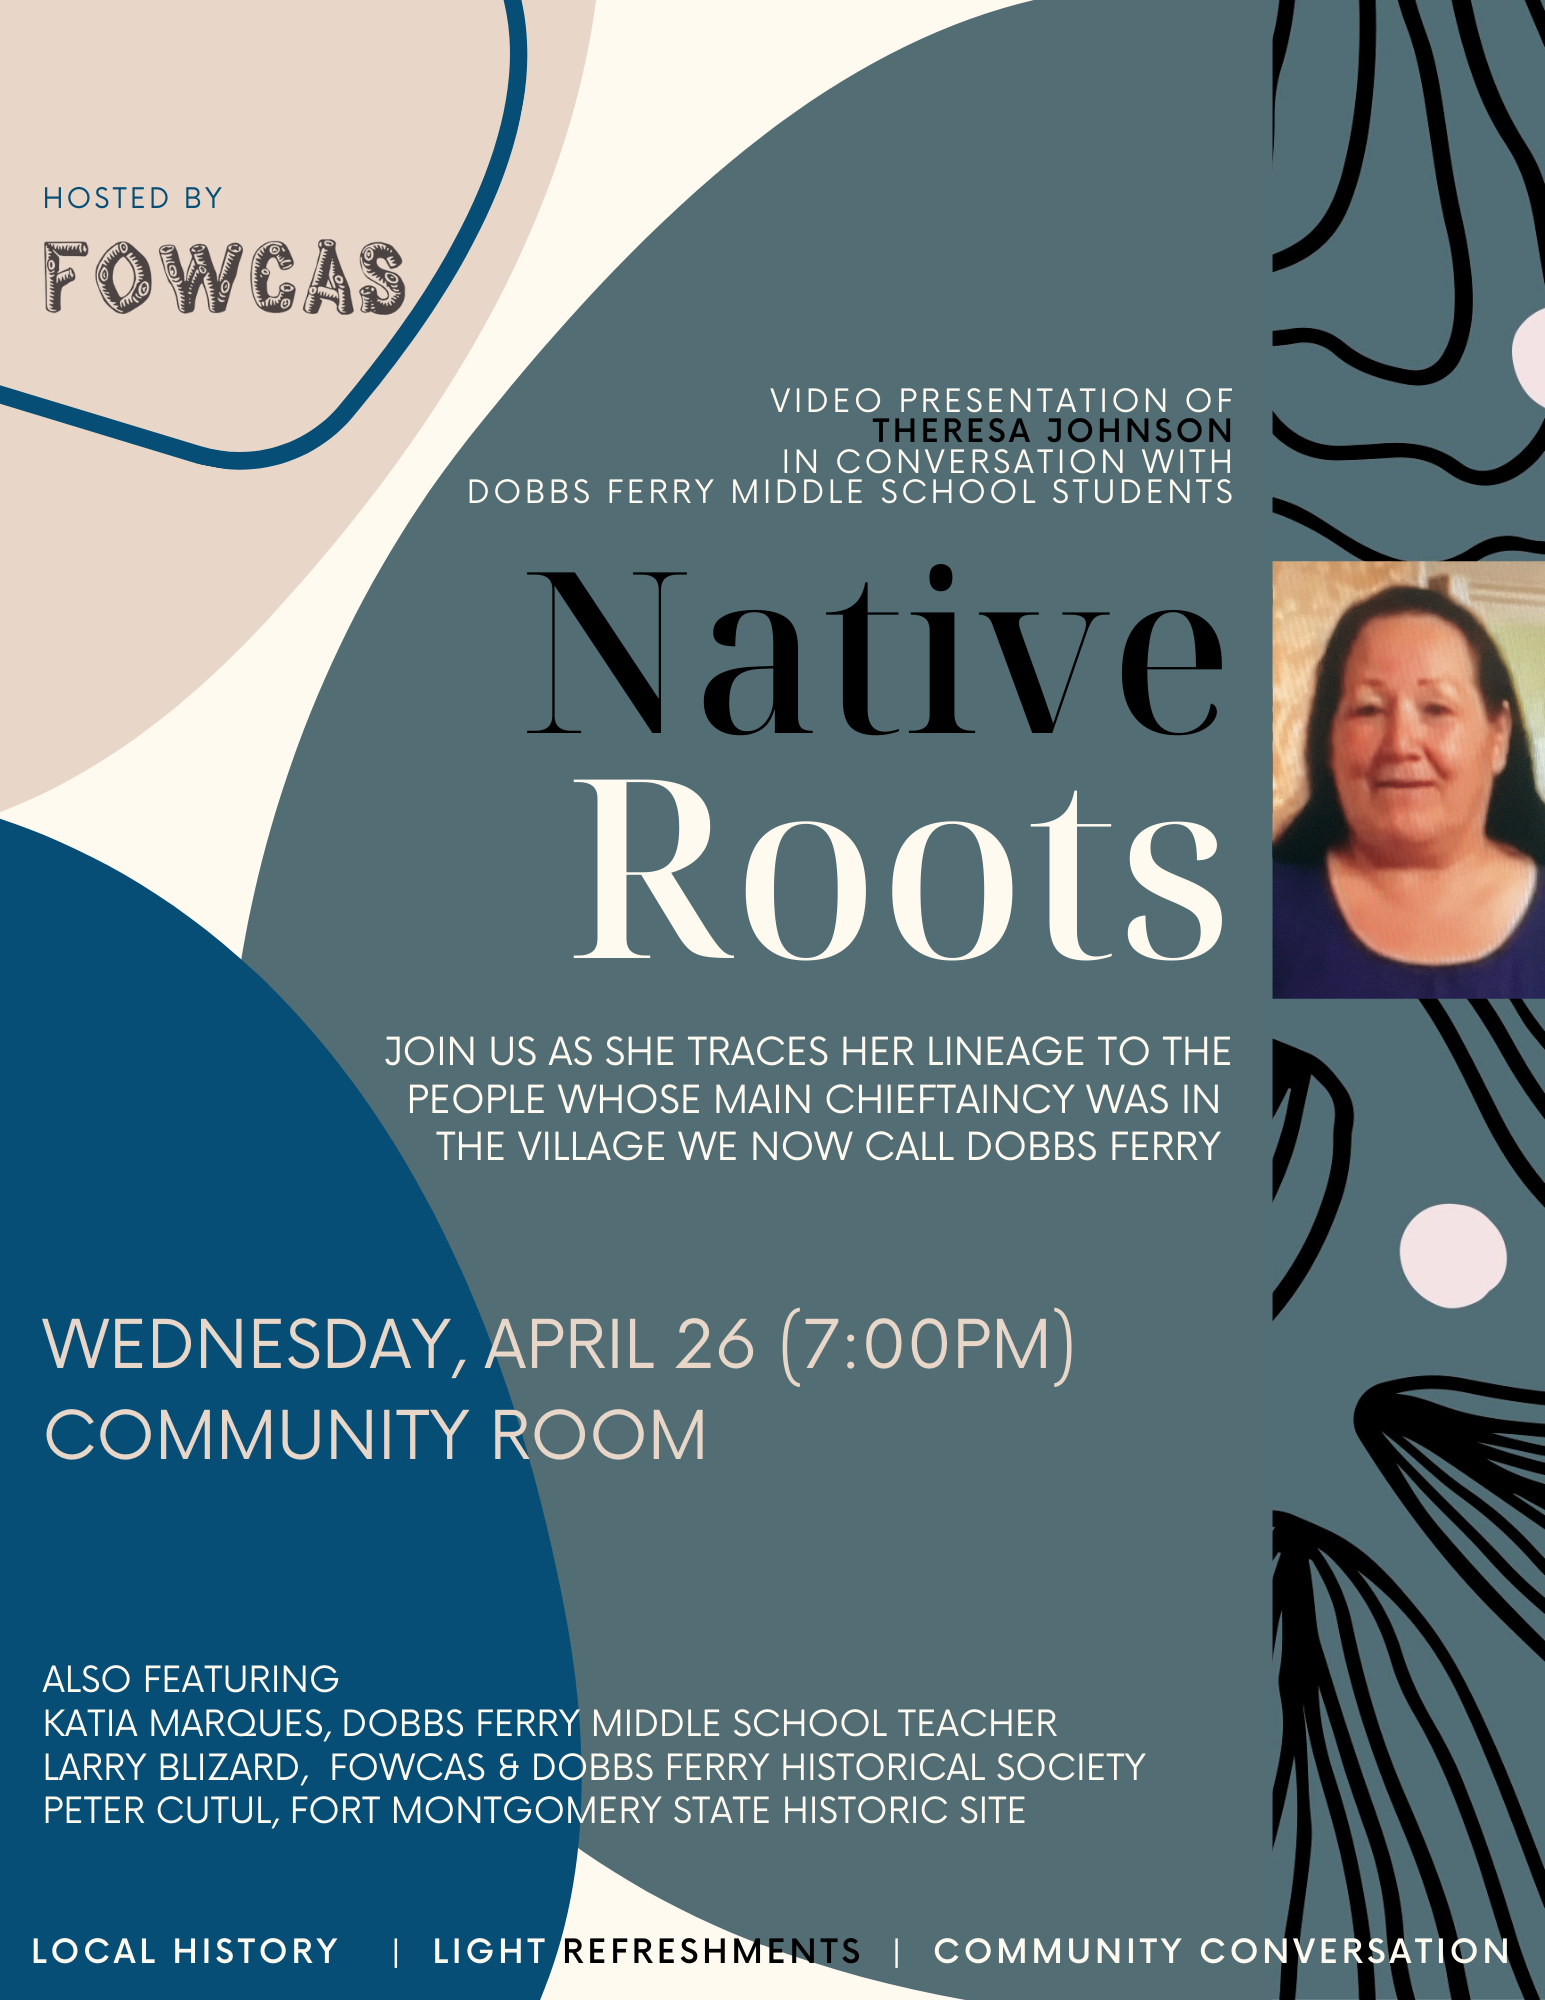 Native Roots in the Community Room: Special Video Presentation